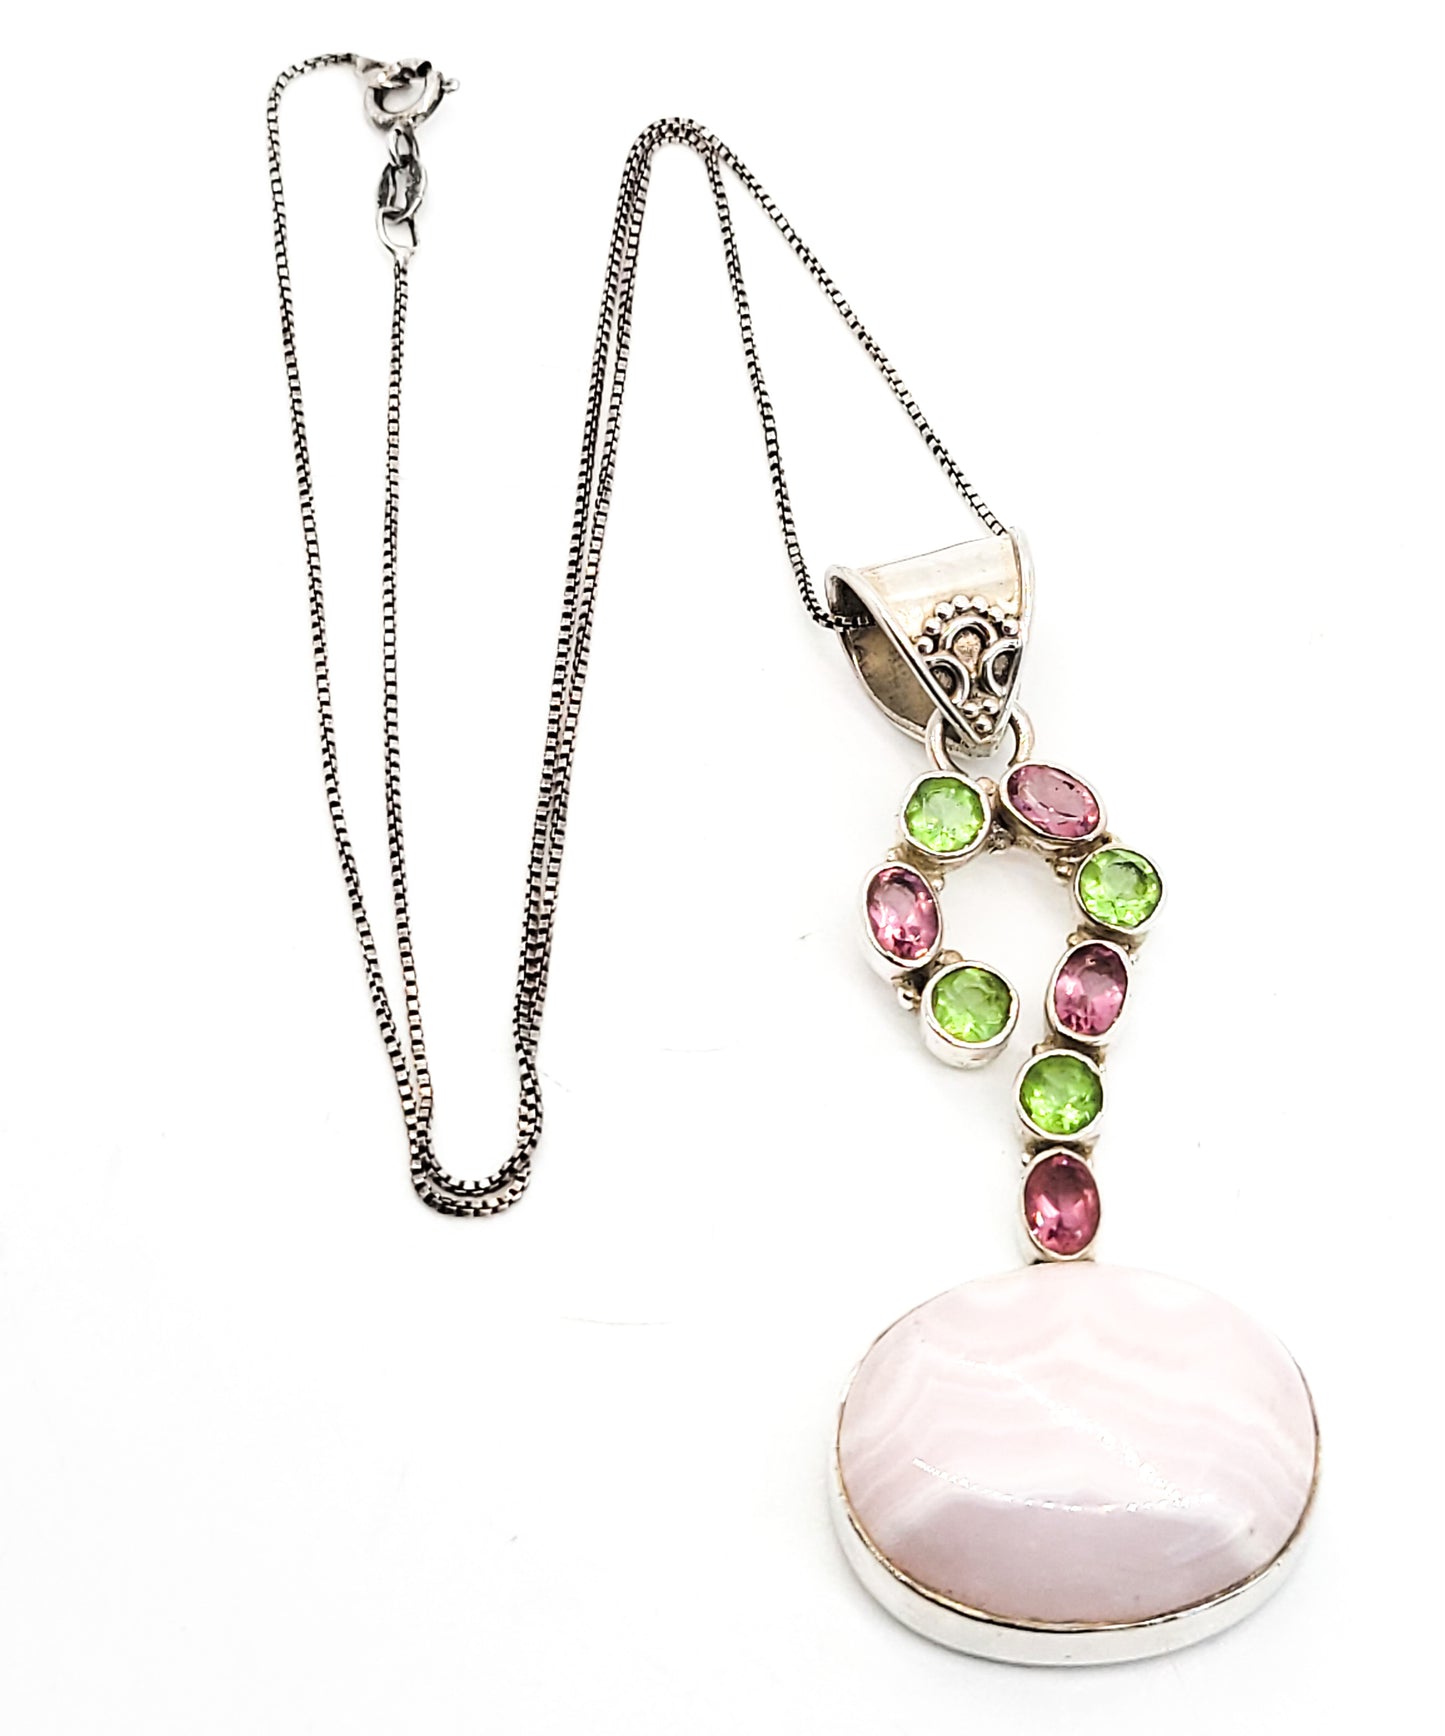 Bali Pink Banded Agate spring pink and green gemstone sterling silver necklace